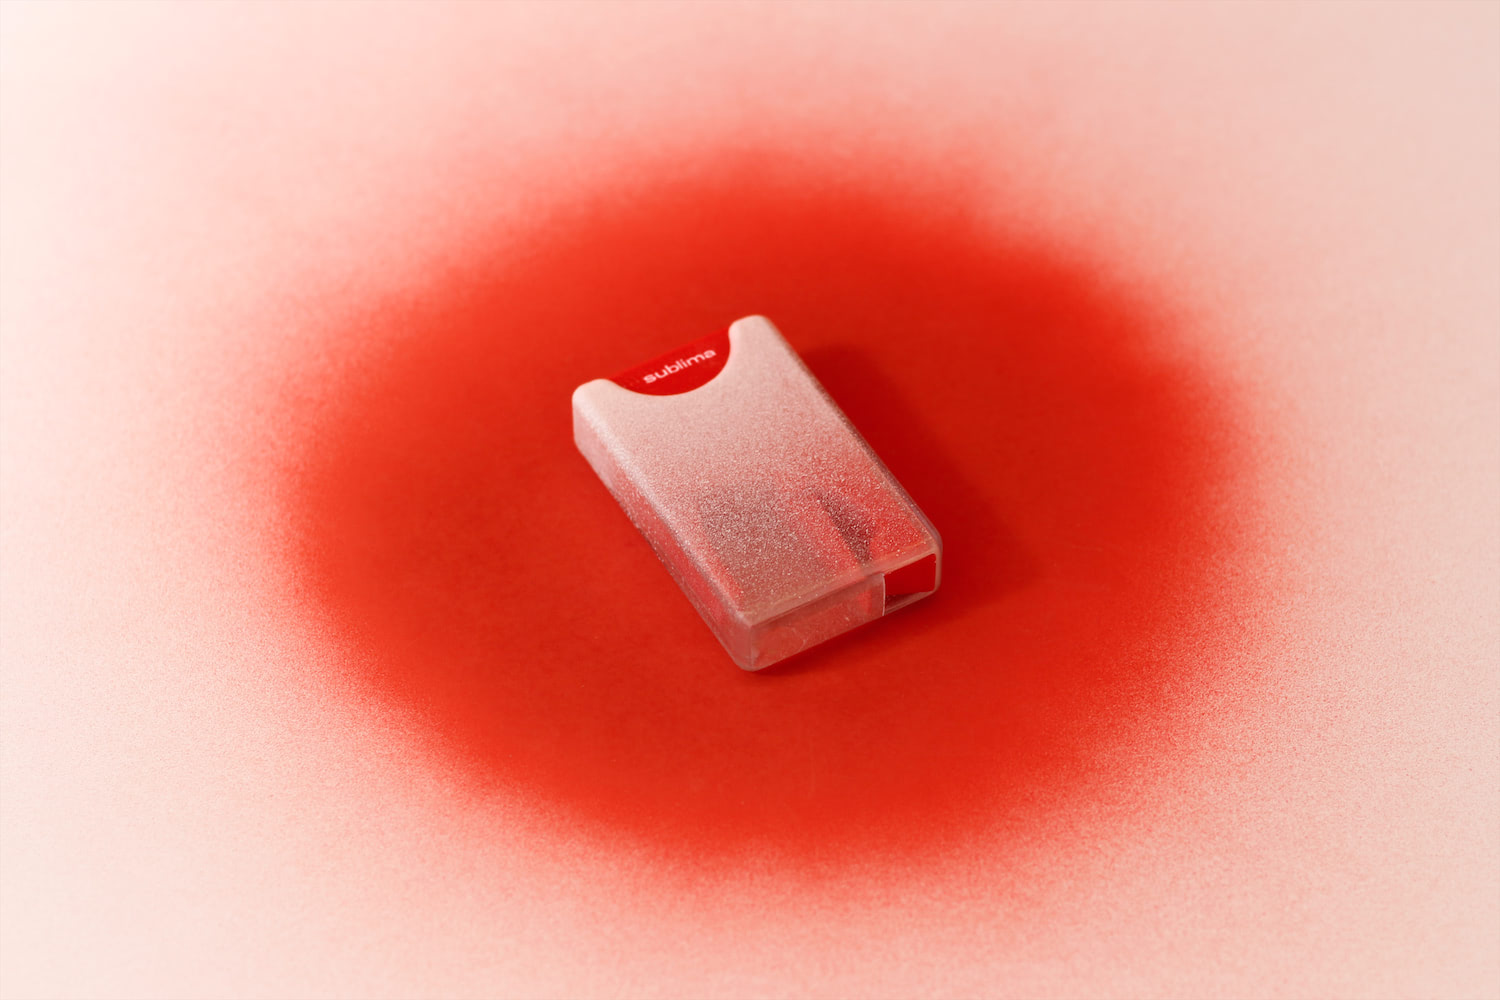 A photo showing the pill dispenser, at a distance, on a spray-painted red backdrop.